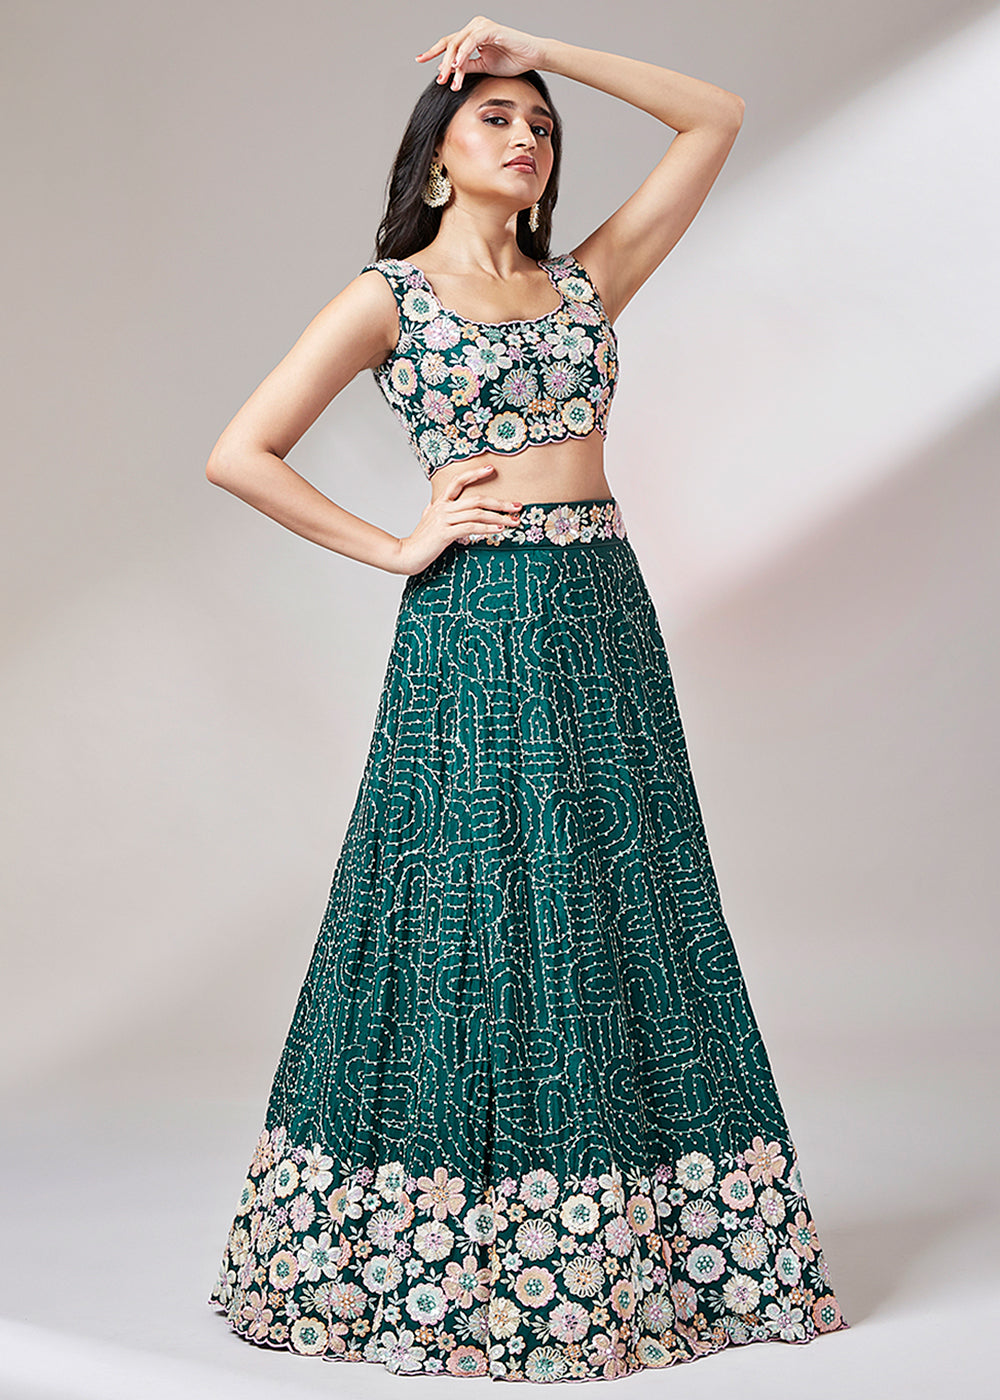 Teal Green Georgette Lehenga Choli With Heavy Sequins Embroidery Work